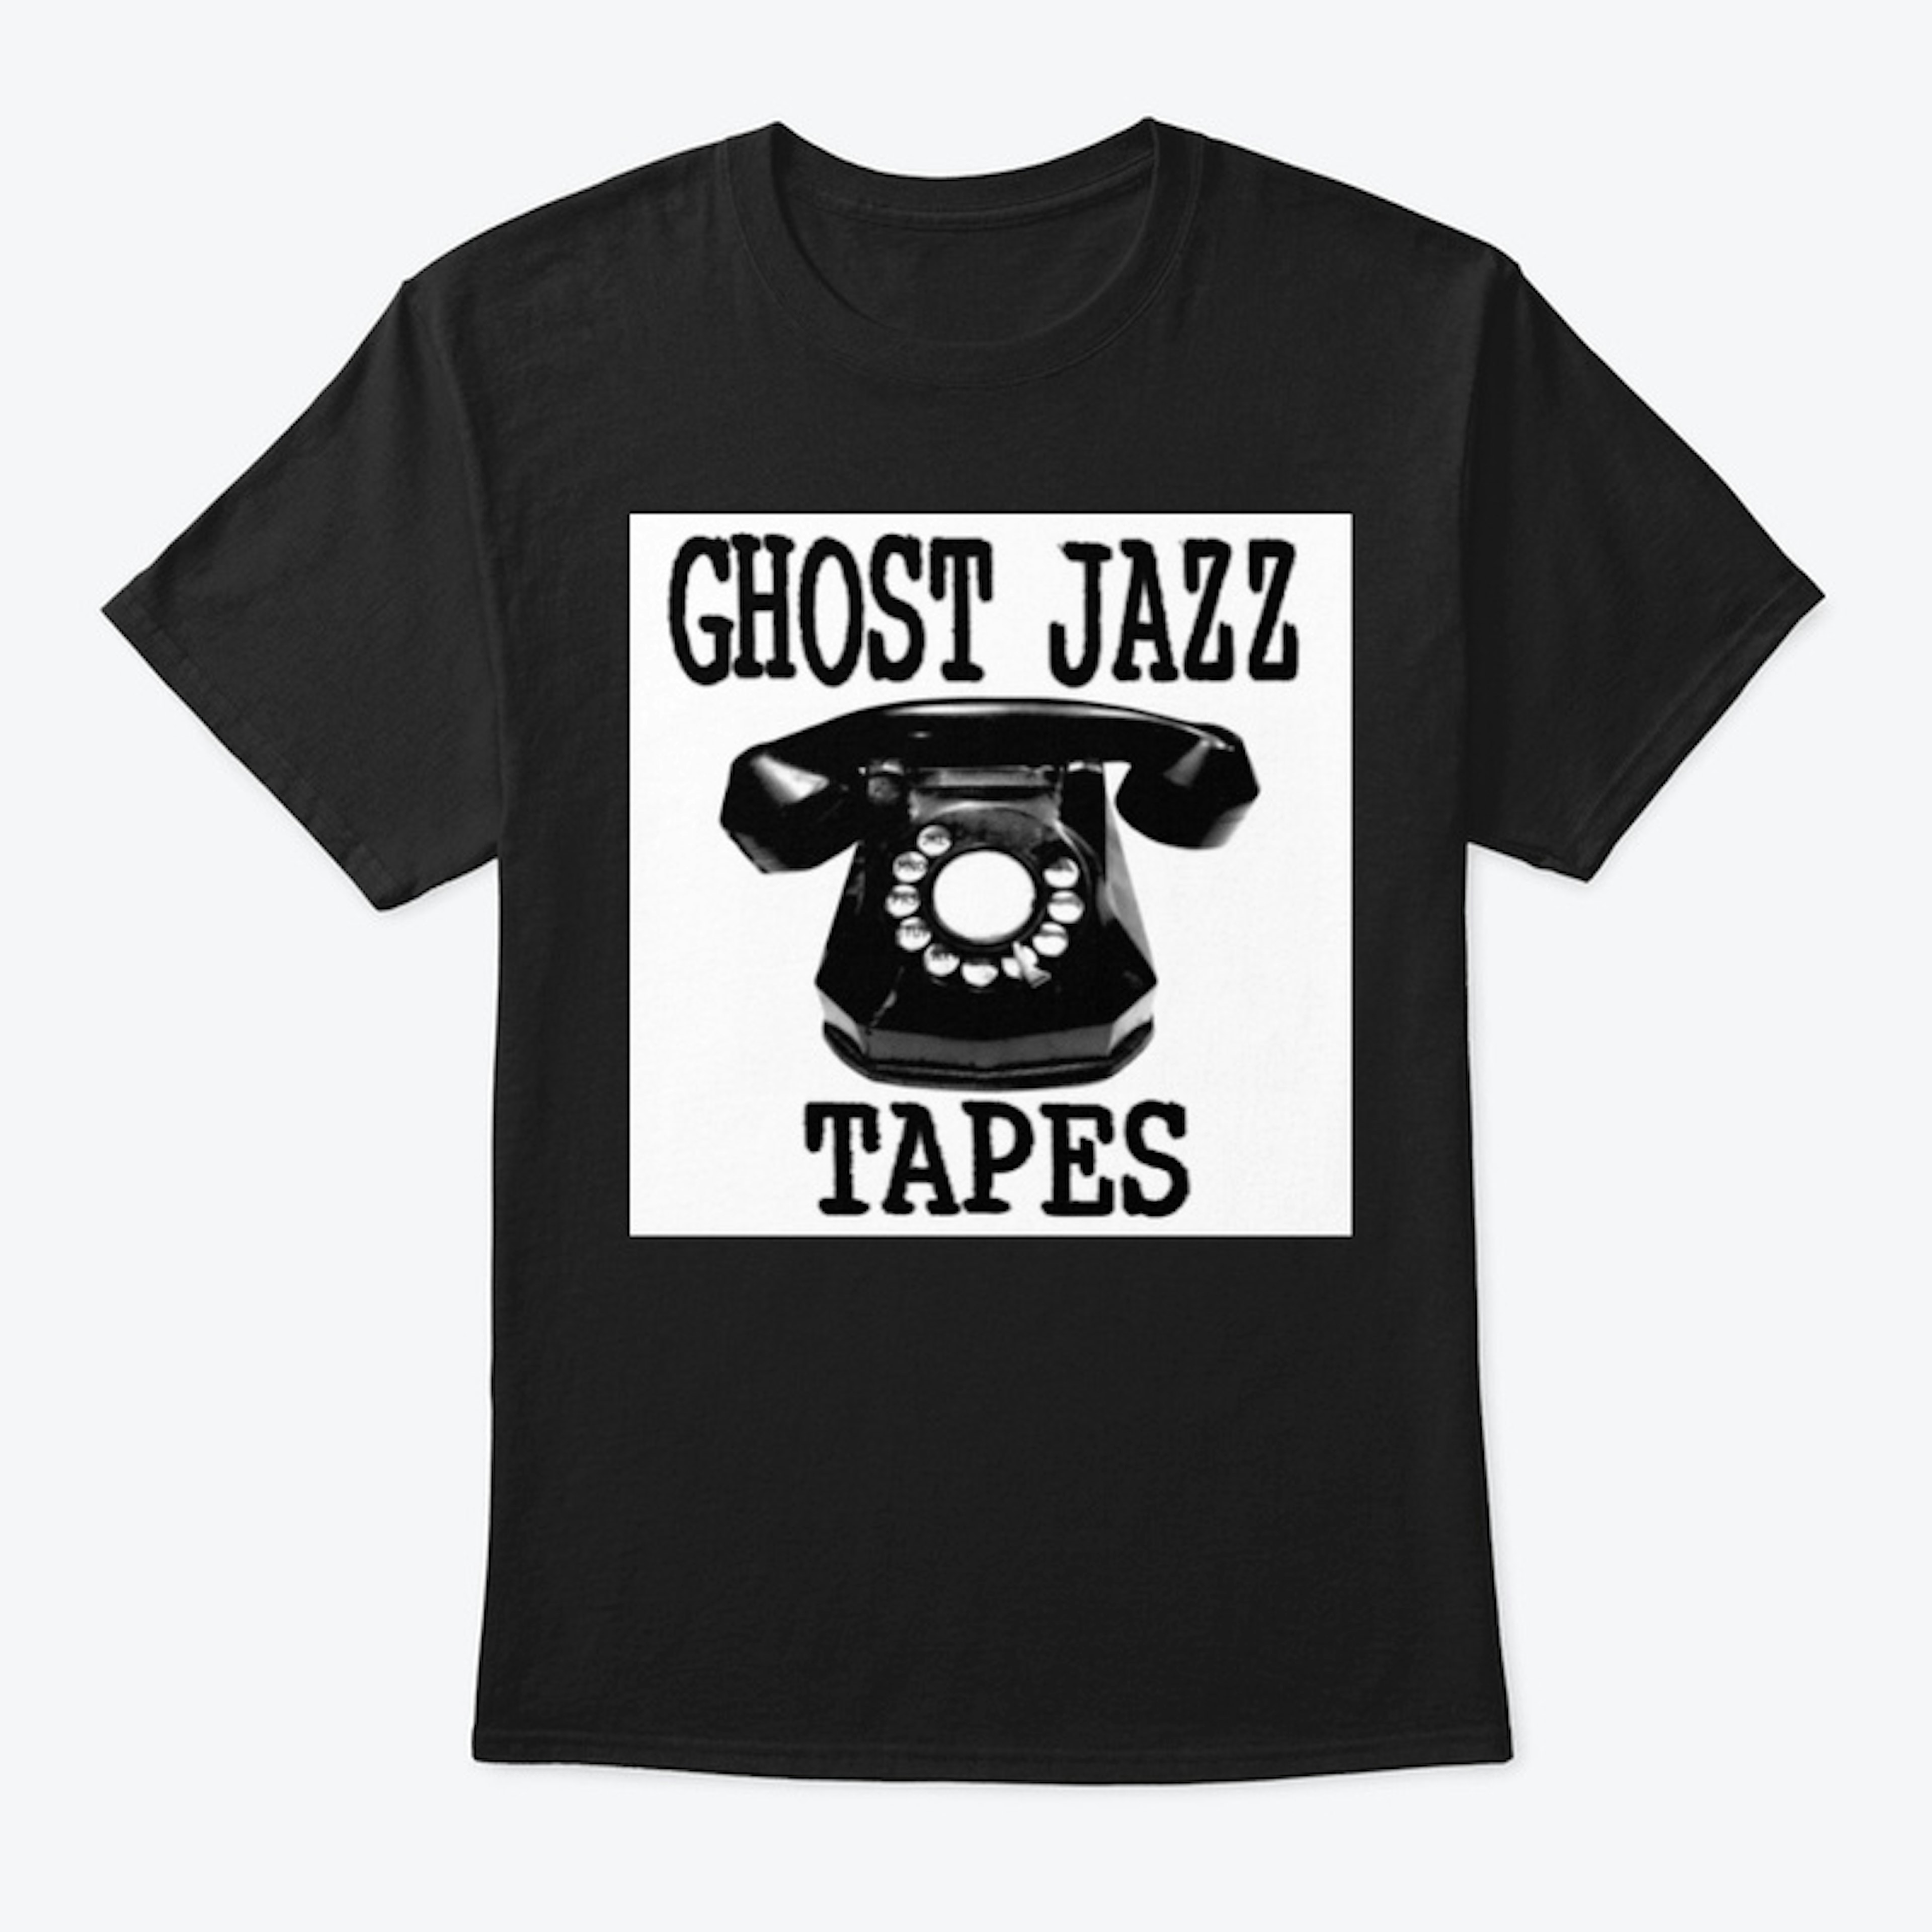 Ghost Jazz Tapes design